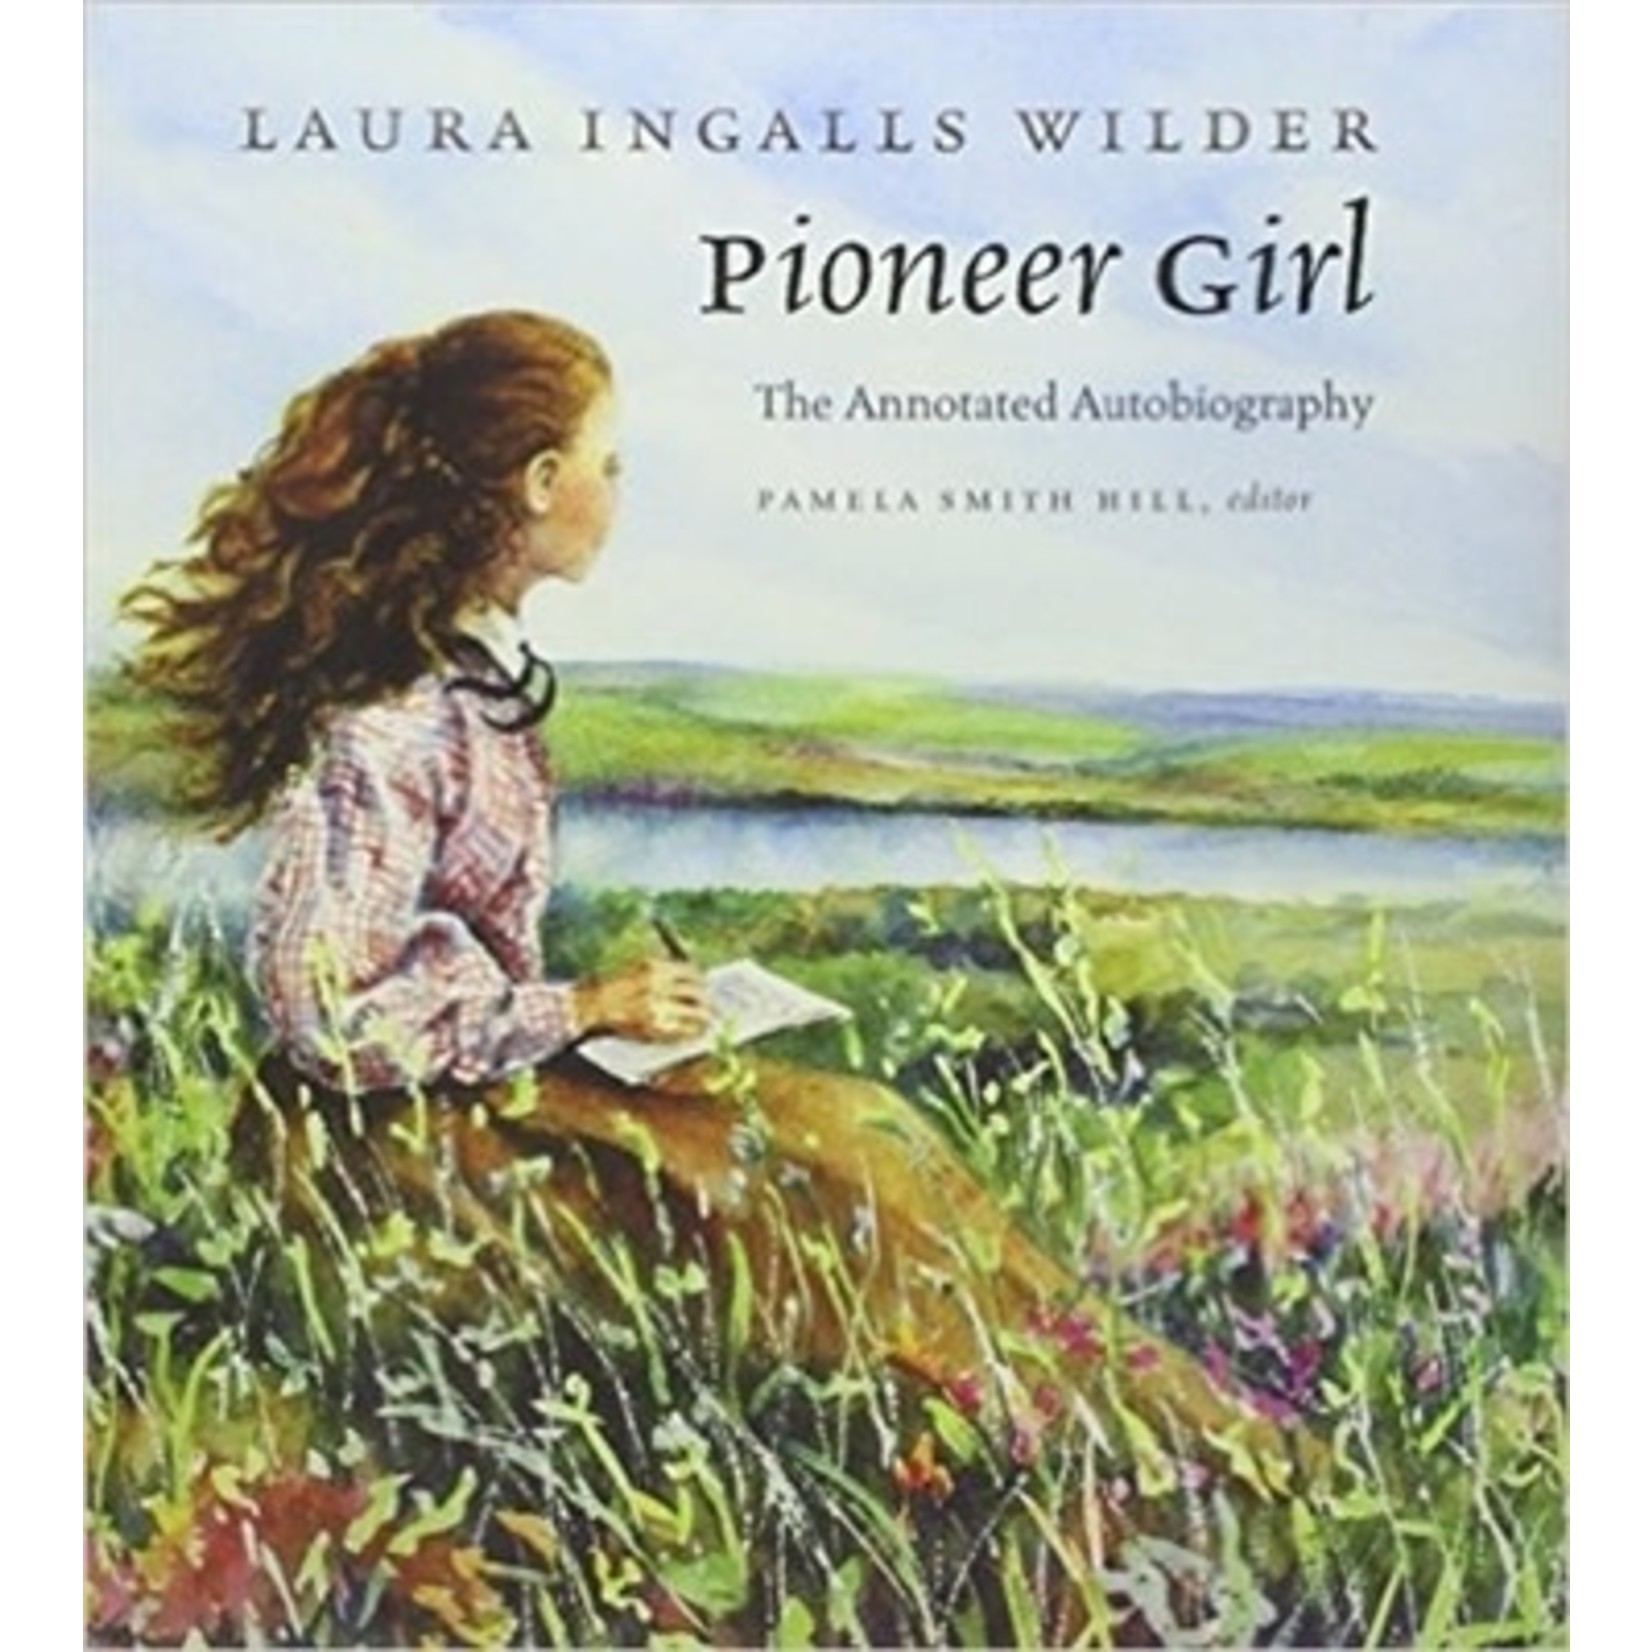 Pioneer Girl--The Annotated Autobiography of Laura Ingalls Wilder